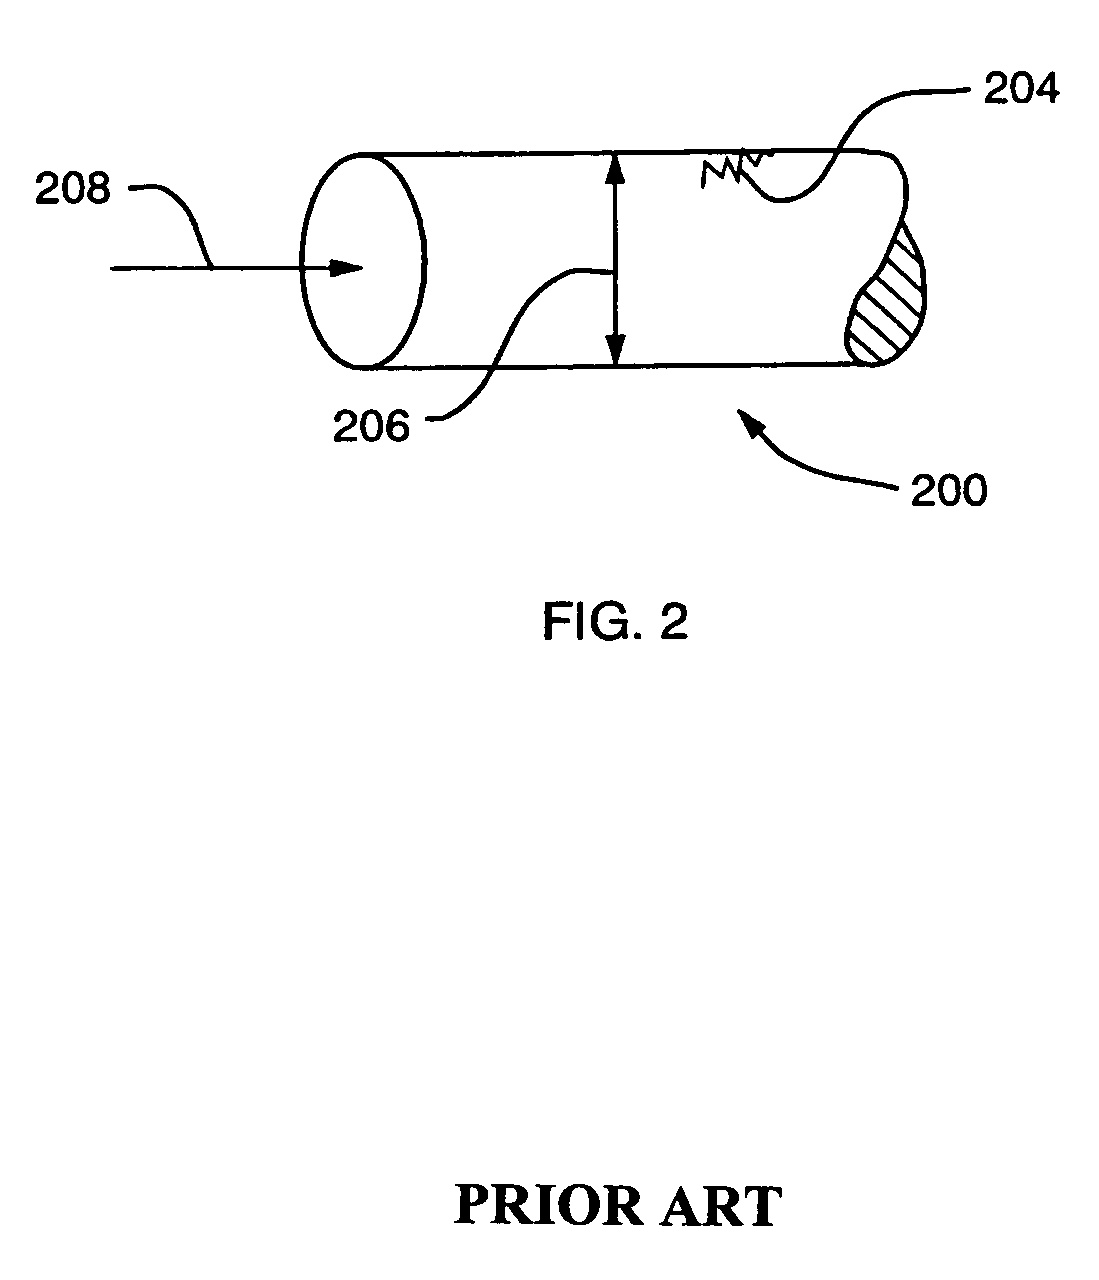 Method and system for automatic water distribution model calibration